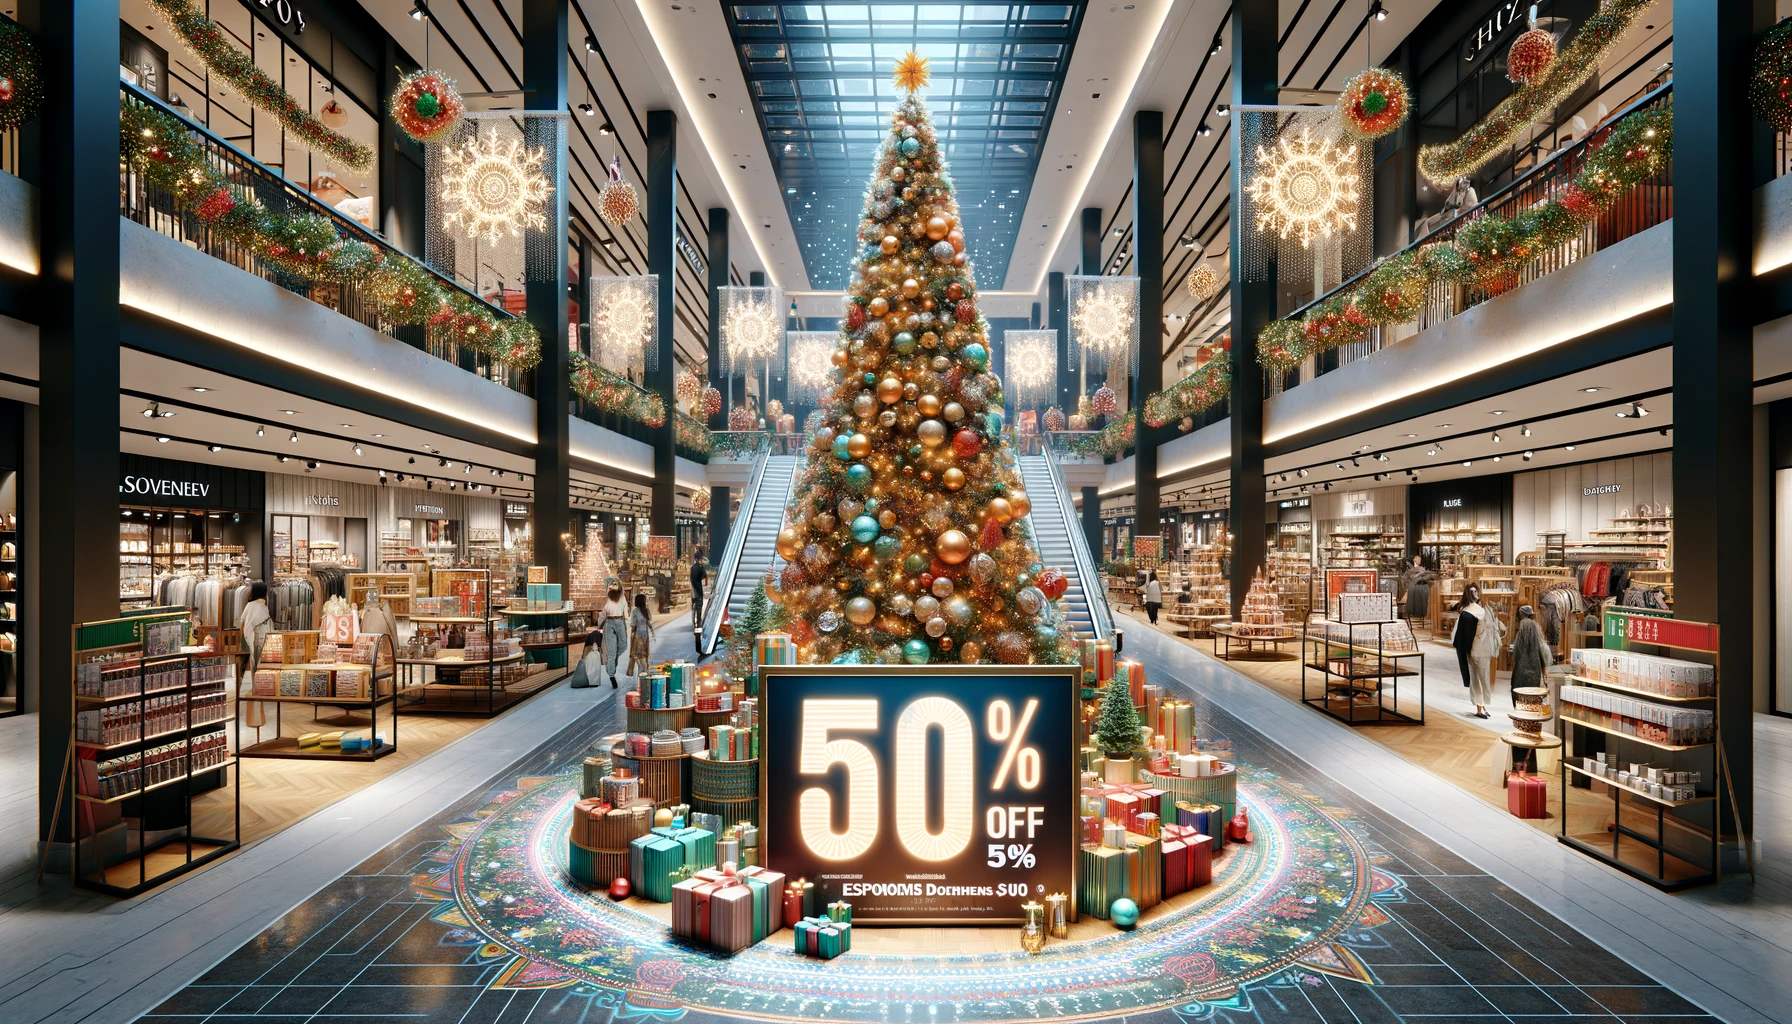 The 5 secrets to boost your online sales during the holiday season